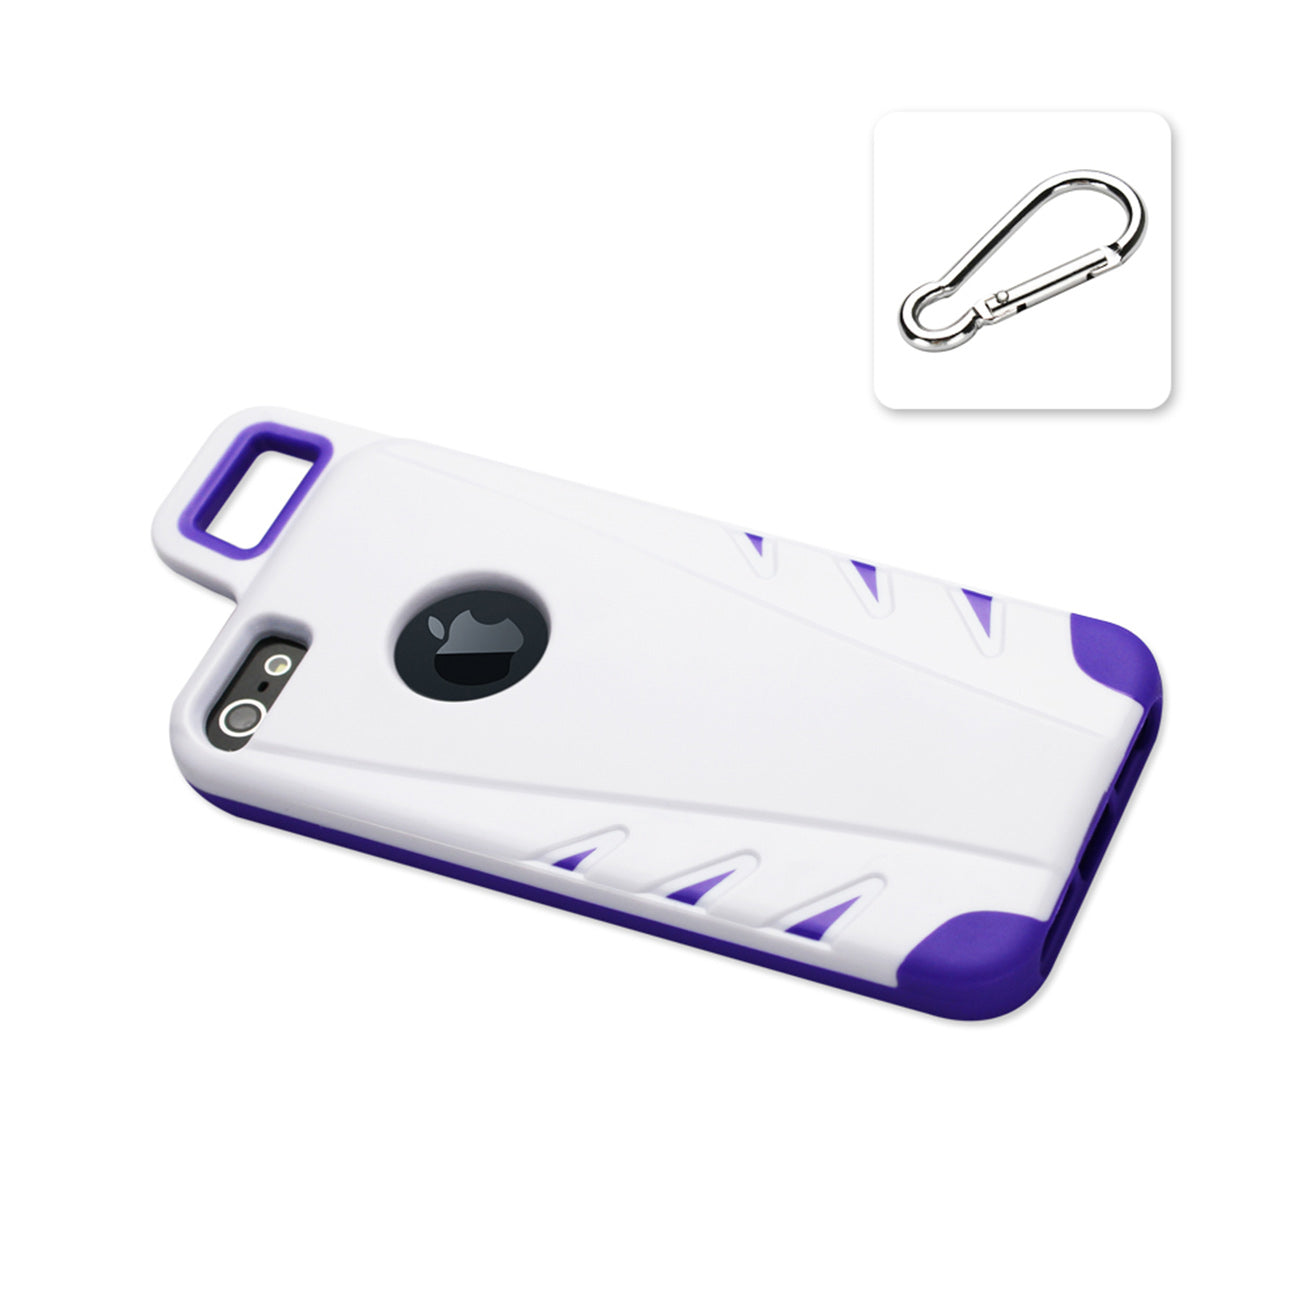 Case Hybrid Drop Proof Workout With Hook iPhone 5/ 5S/ SE White Purple Color